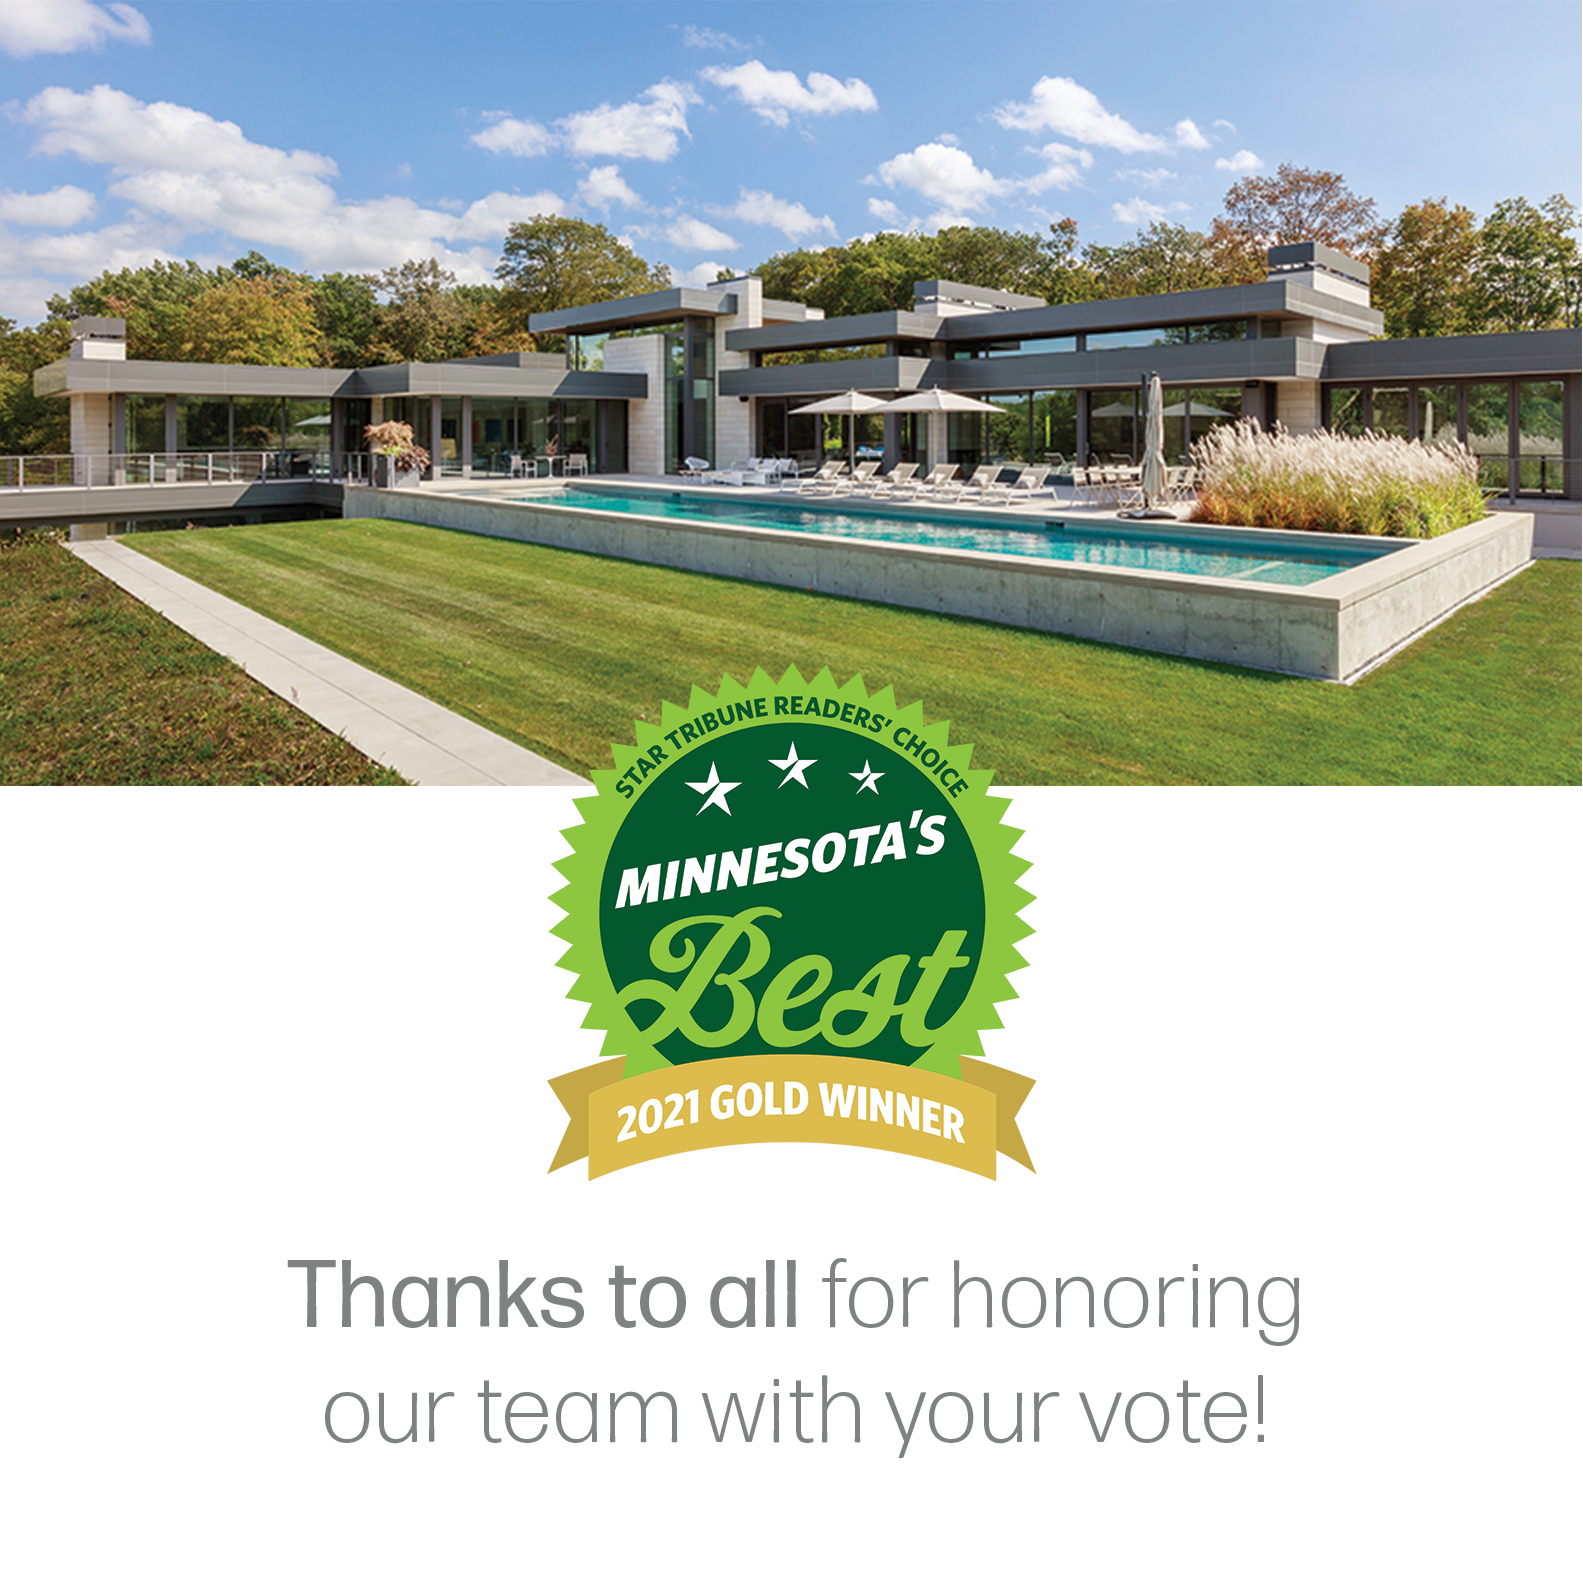 A graphic image of a Charles R. Stinson Home and a green and gold award emblem that says "Minnesota's Best 2021 Gold Winner" and text that says "Thanks to all for honoring our team with your vote!"